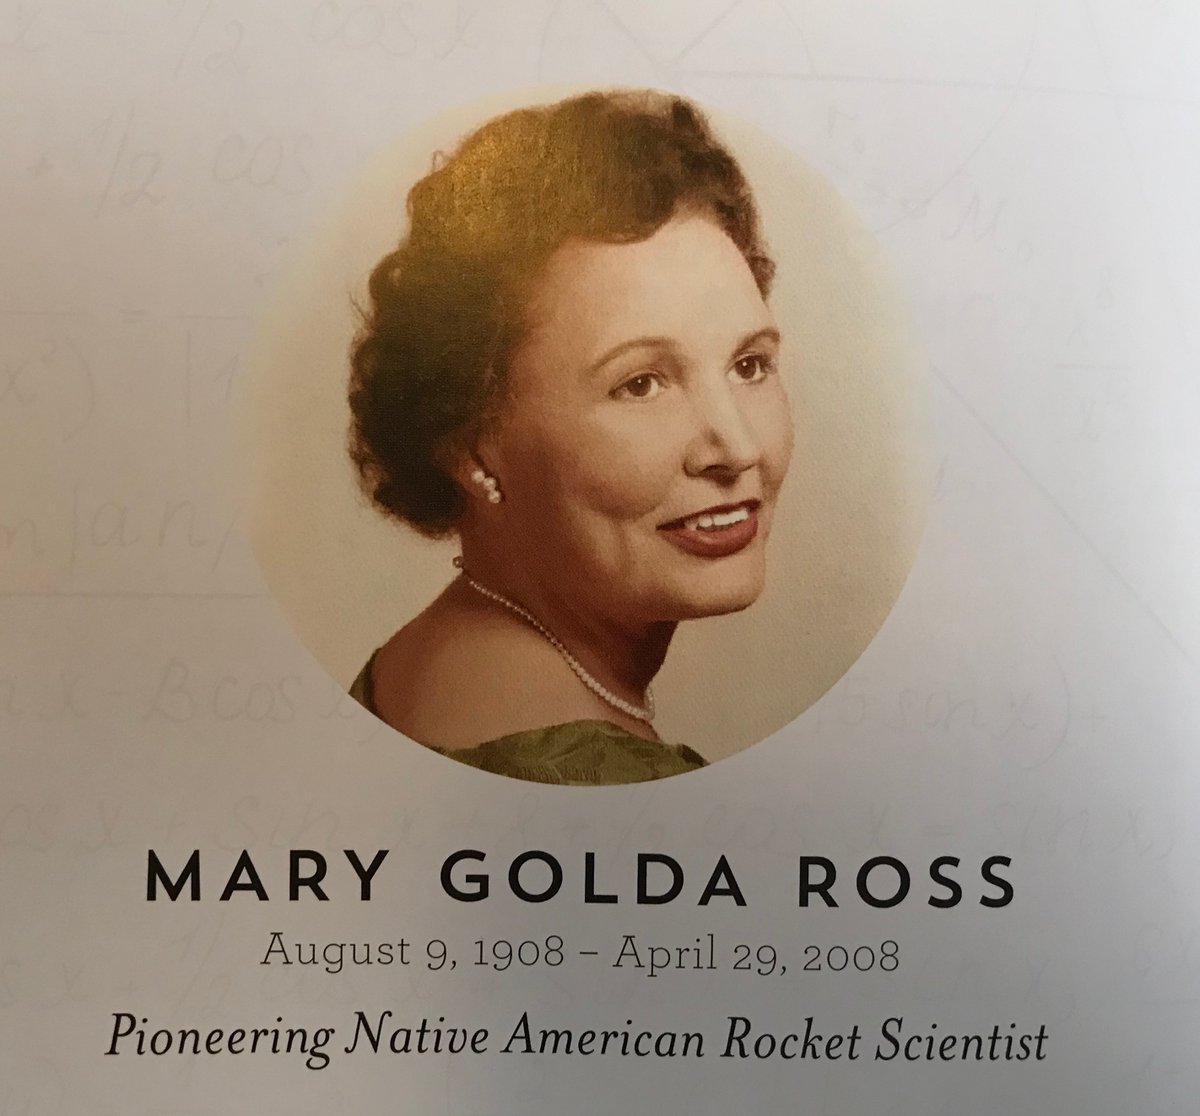 GREAT WOMAN OF MATHEMATICS: MARY GOLDA ROSS, 1908-2008. Mary Golda Ross was the first Native American woman to become an engineer. The great-granddaughter of a Cherokee Chief, she grew up in the Cherokee tradition, which educated boys and girls equally. She graduated from 1/x